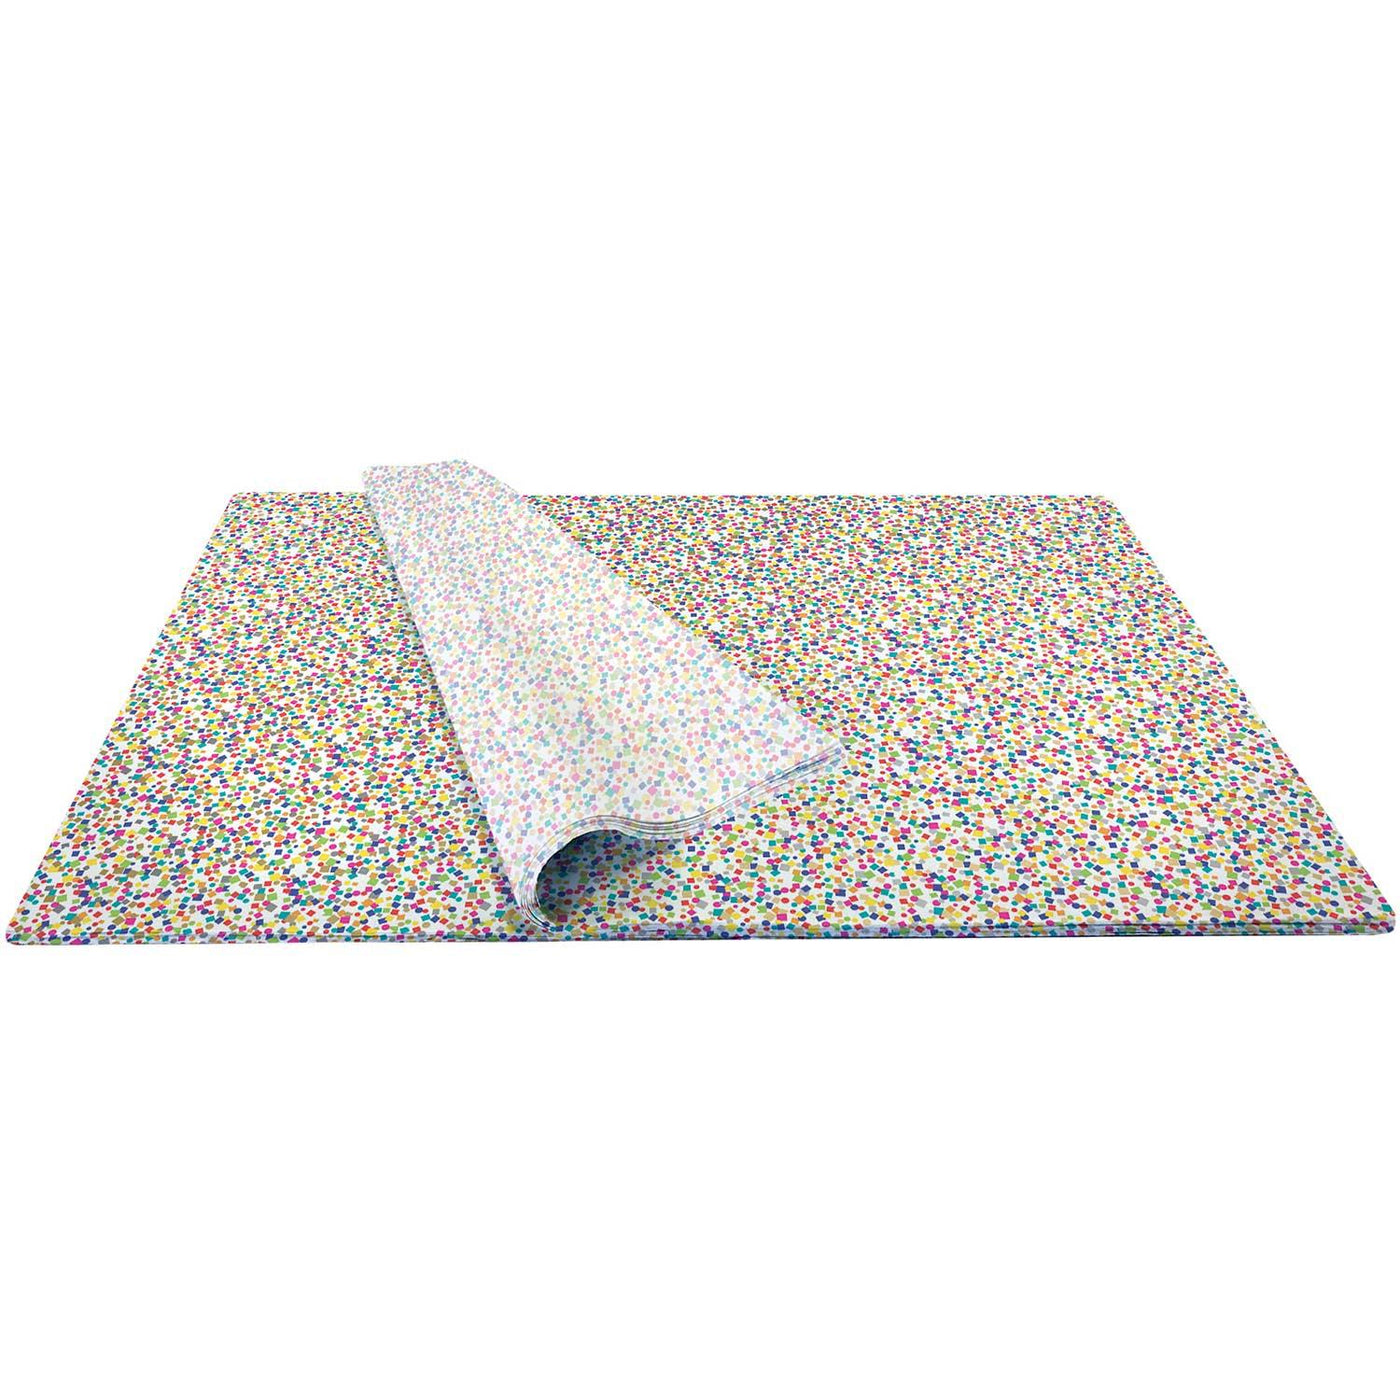 Party Popper 20" x 30" Gift Tissue Paper by Present Paper - Vysn